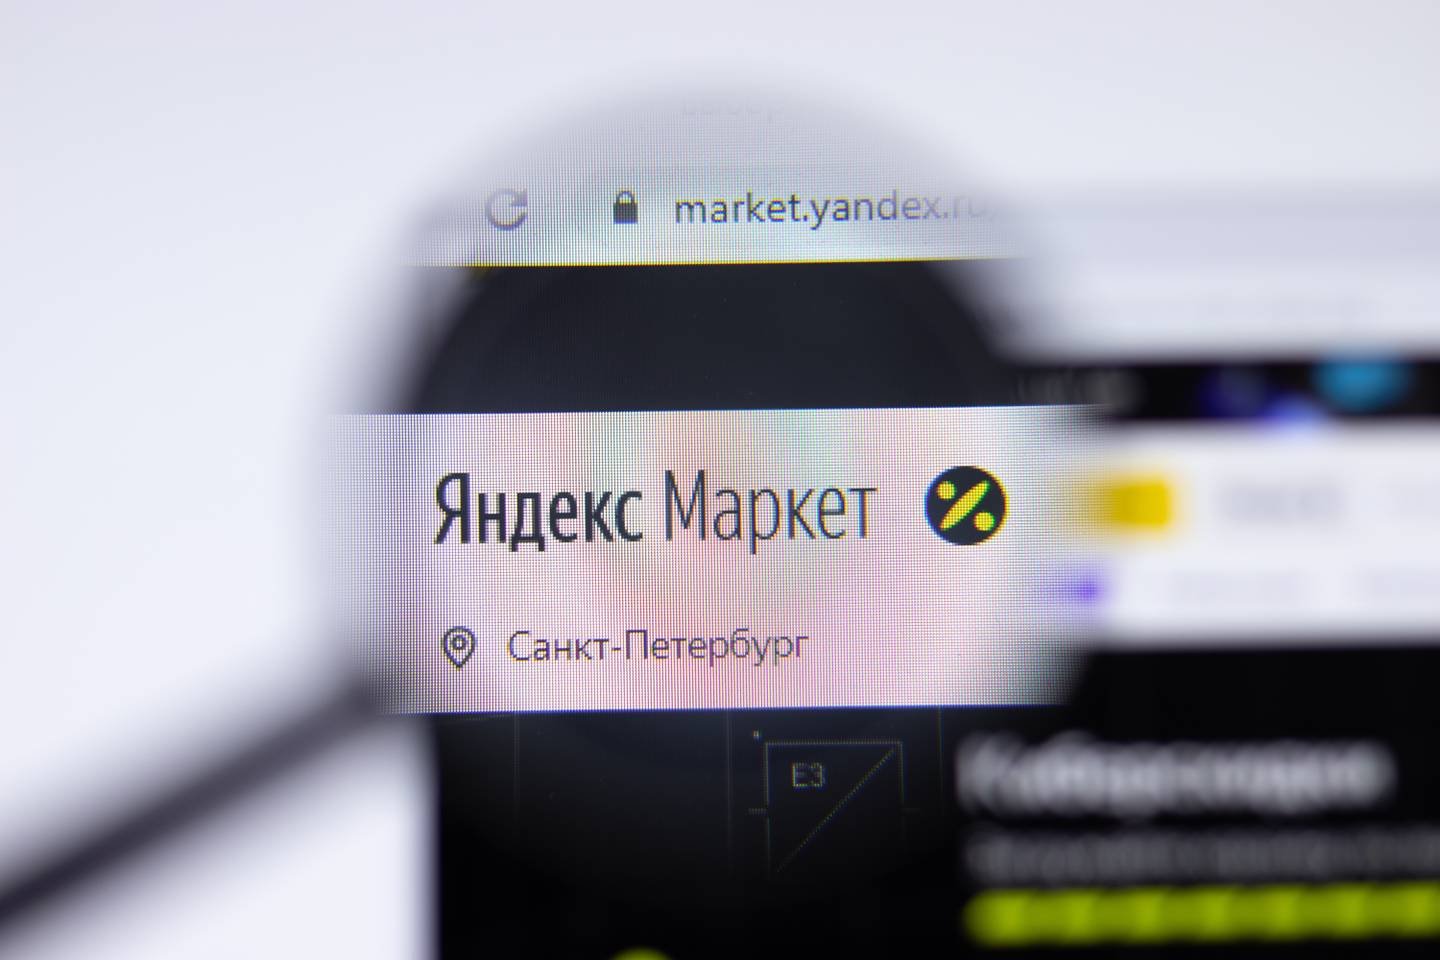 Yandex.Market is one of Russia's leading e-commerce platform players. Shutterstock